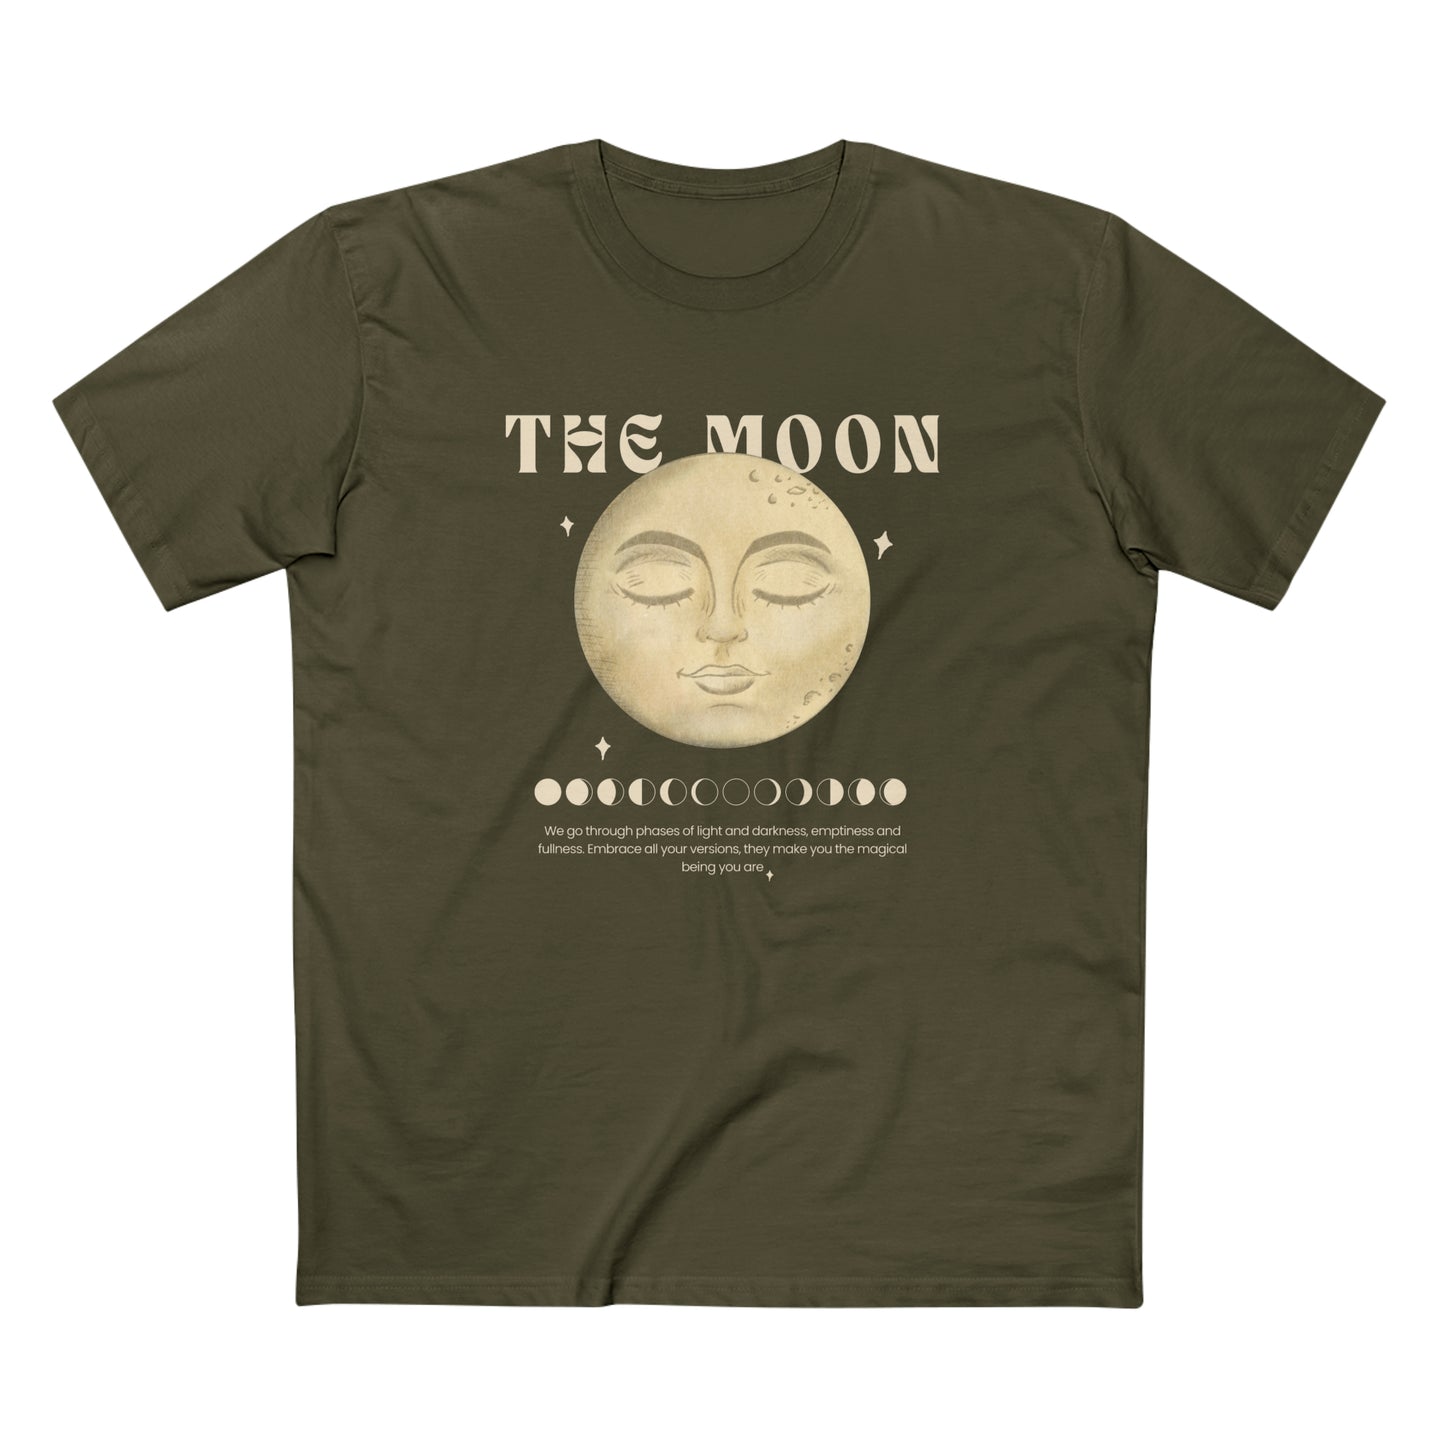 THE MOON PHASES - Women's Cotton Tee